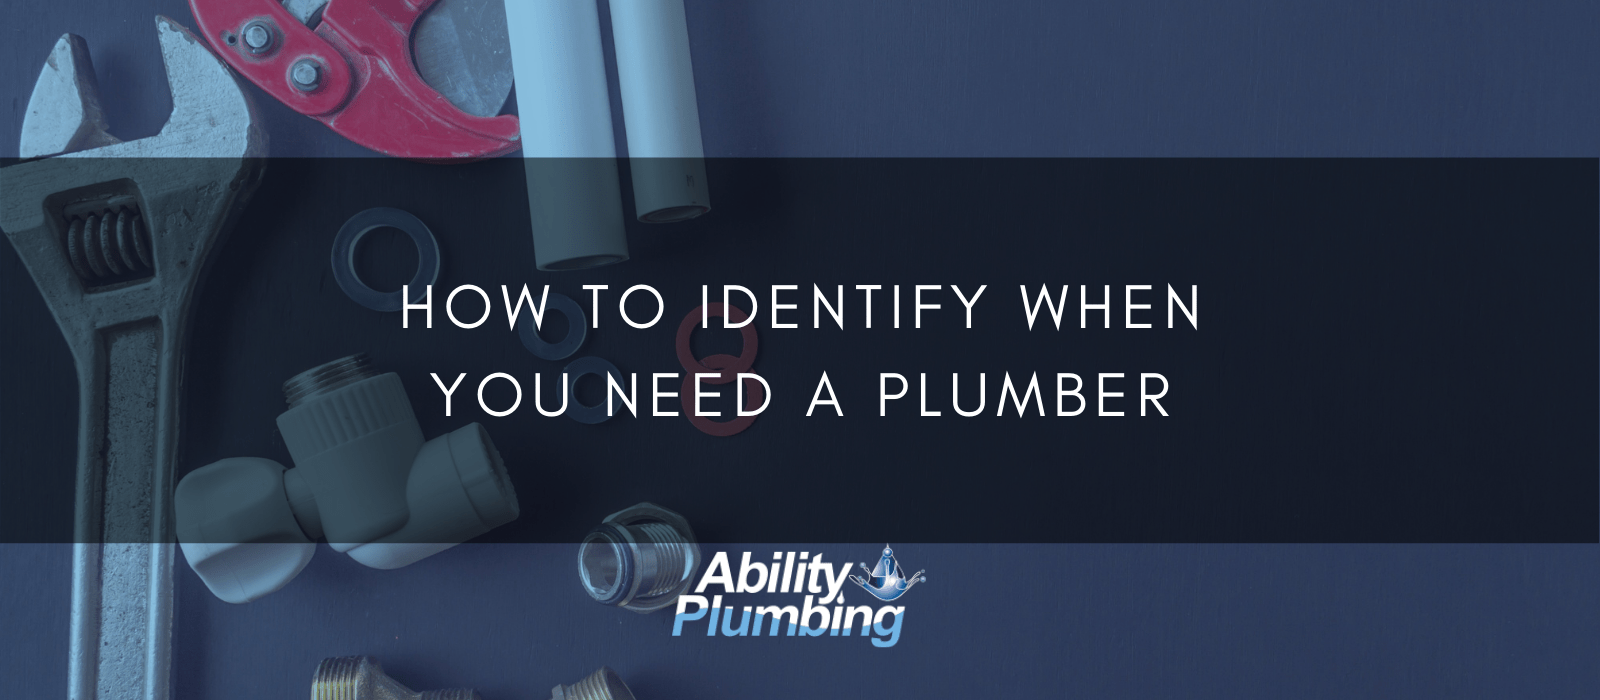 Do You Know When To Call a Plumber